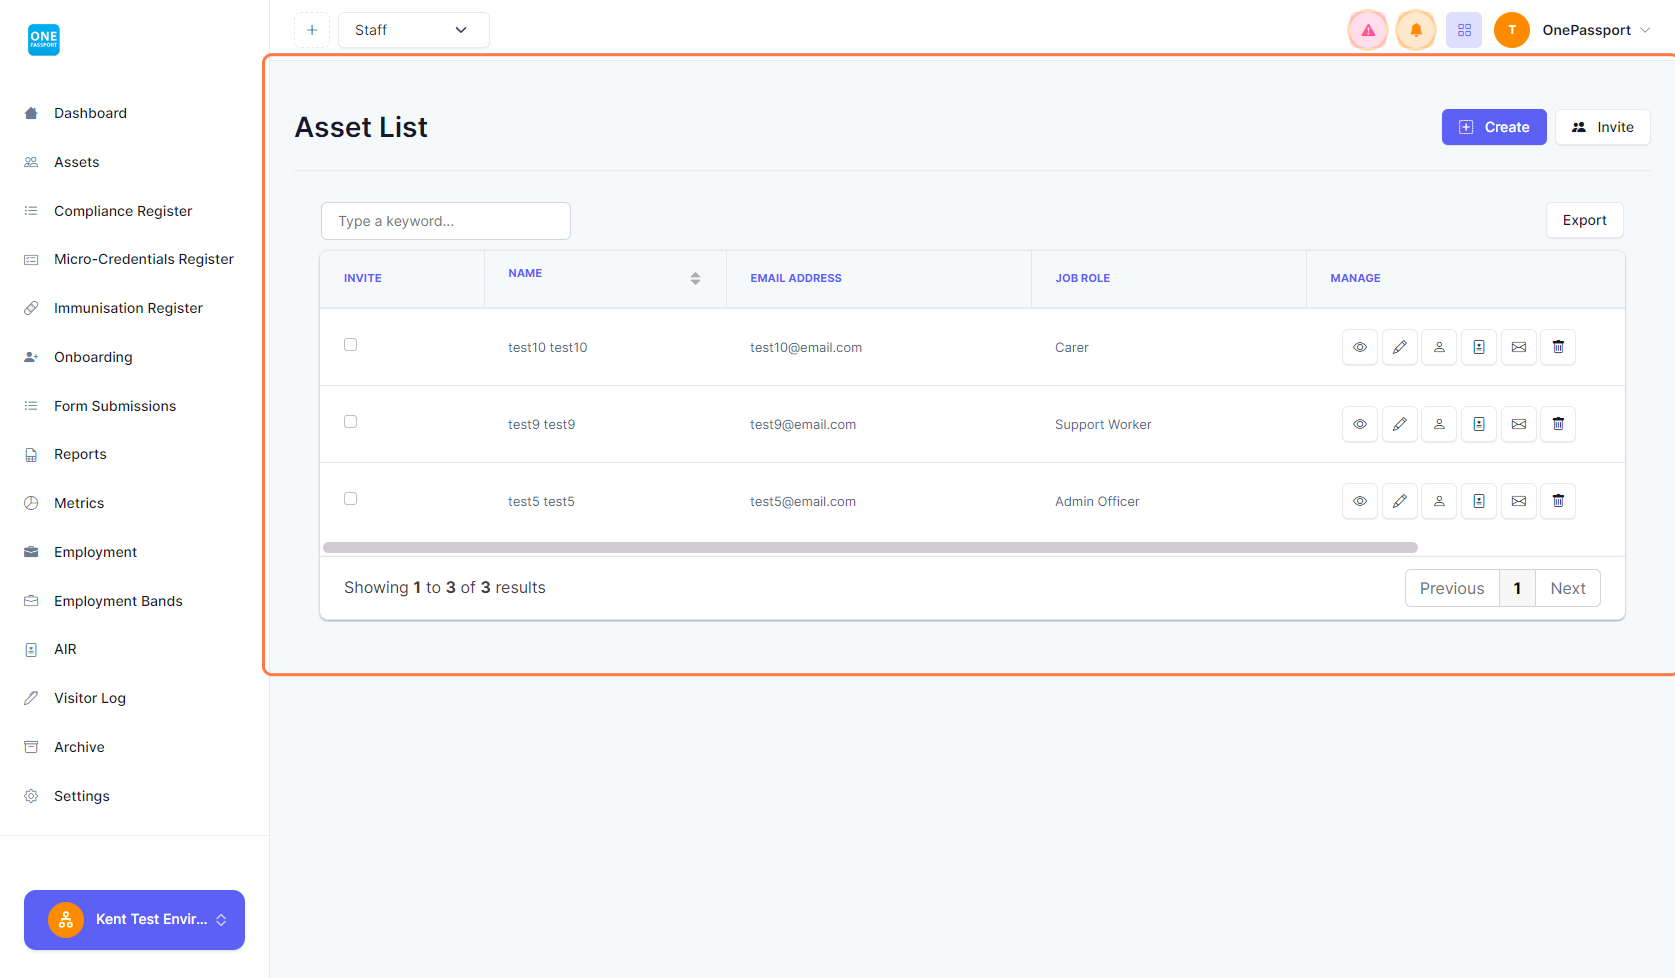 The page should give you the Asset List where you can see the different columns like Name, Email Address, and Job Role. Under the Manage column are the buttons to view personal information, Edit, go to the Profile page, Invite, and Delete asset/workers.